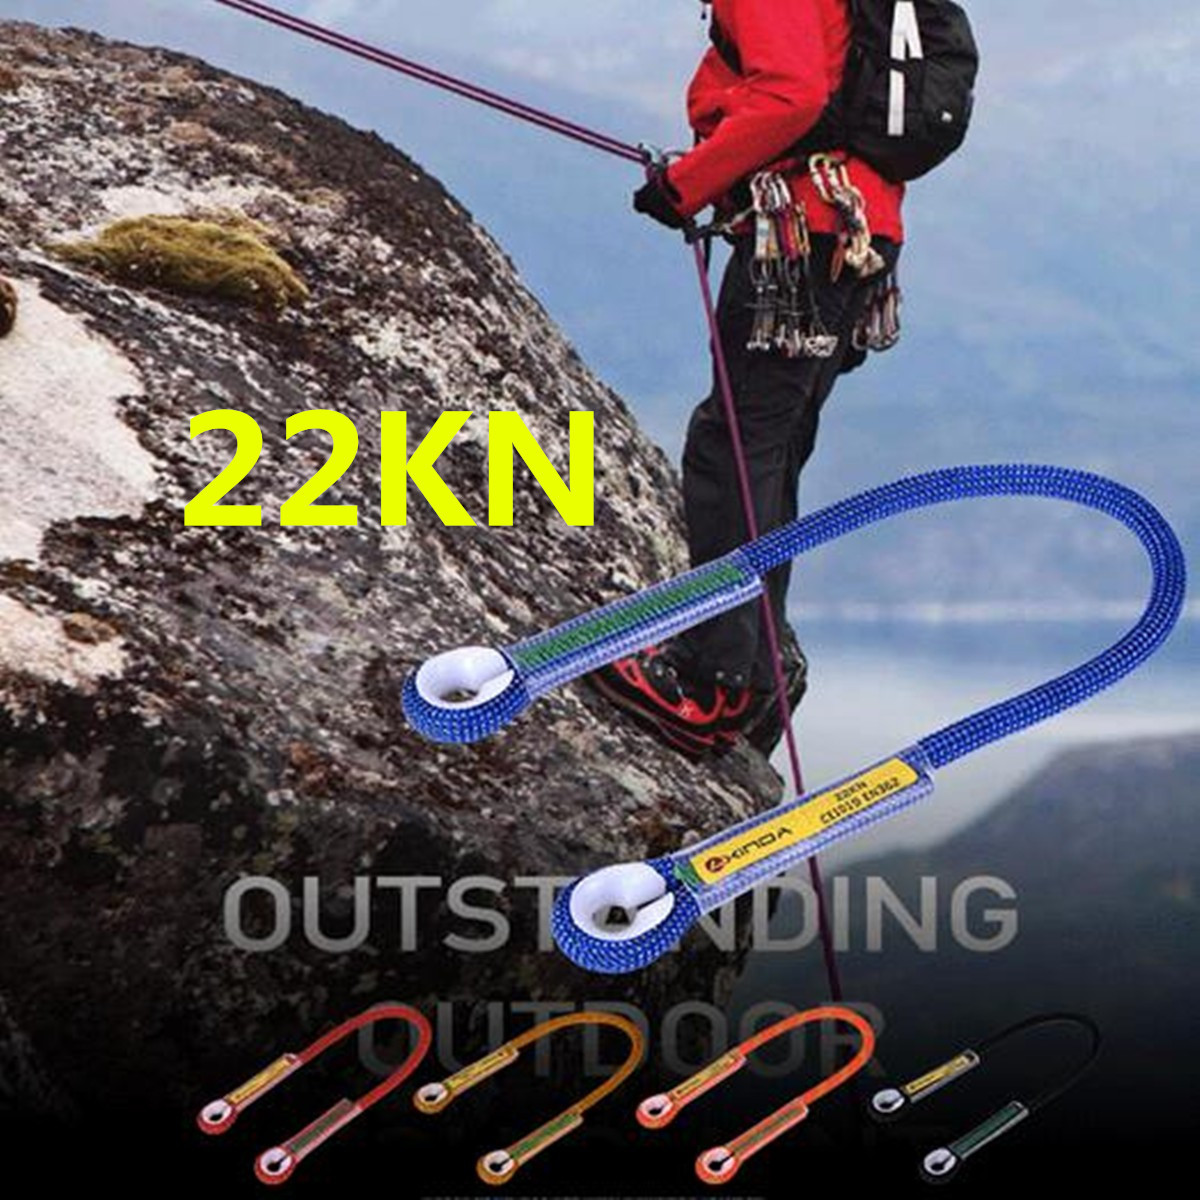 60CM-Rock-Climbing-Safety-Loop-Rope-Sling-Harness-Tree-Abseil-RescuE-Mountaineering-Equipment-1105004-1